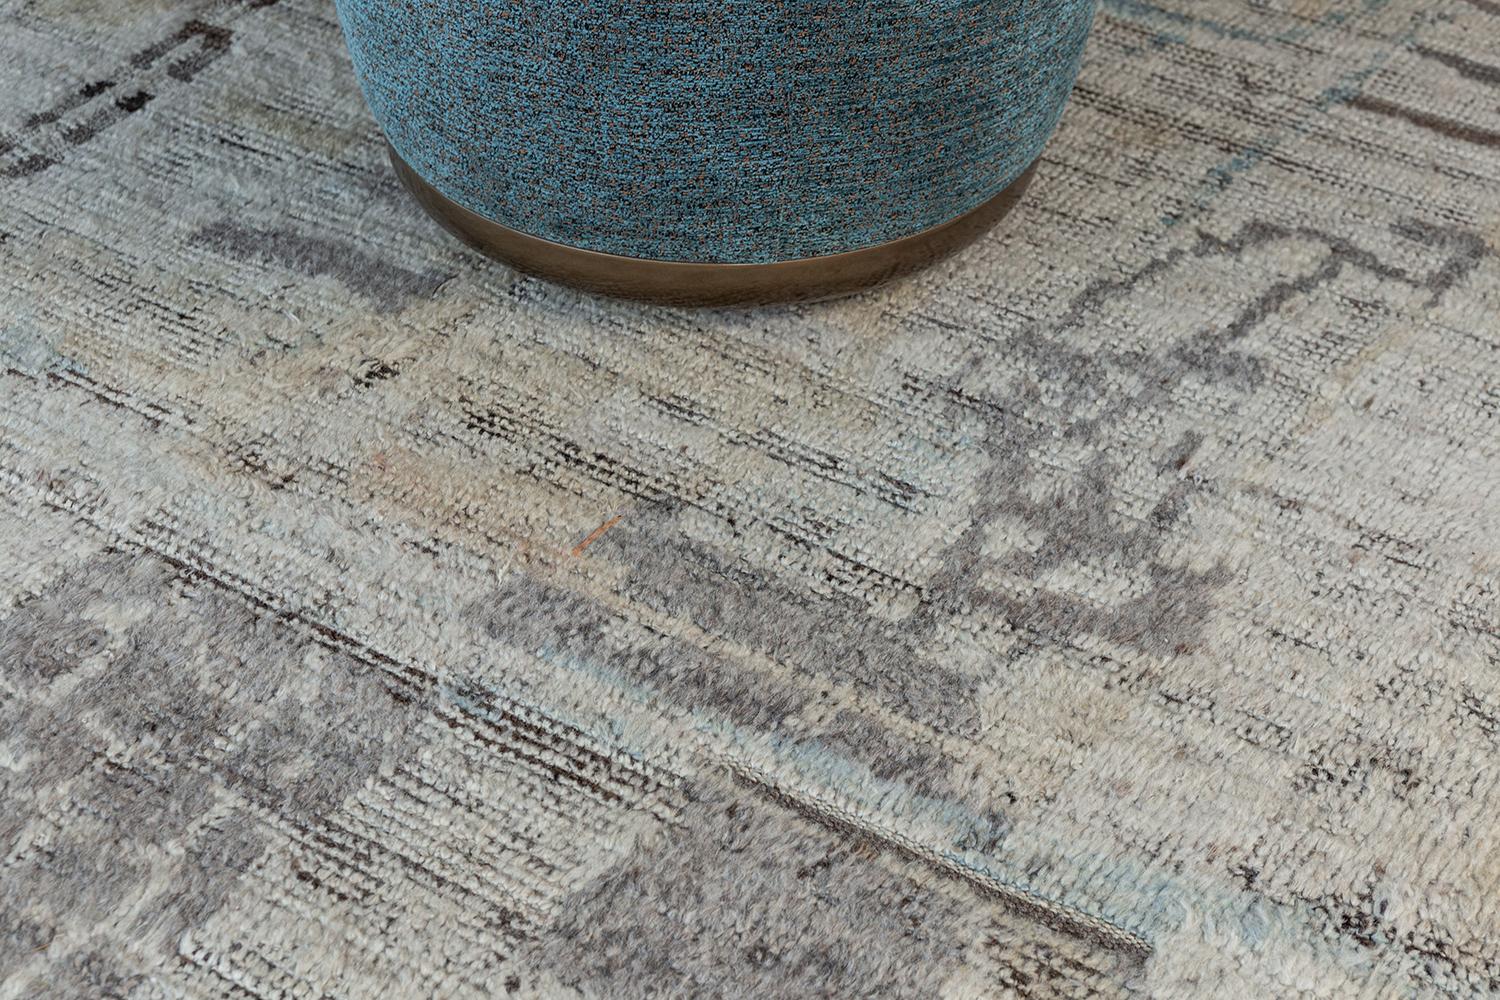 Meliska' is an exquisitely textured rug with irregular motifs inspired from the Atlas Mountains of Morocco. Earthy tones of ivory and chocolate brown surrounded by umber brown shag work cohesively to make for a great contemporary interpretation for